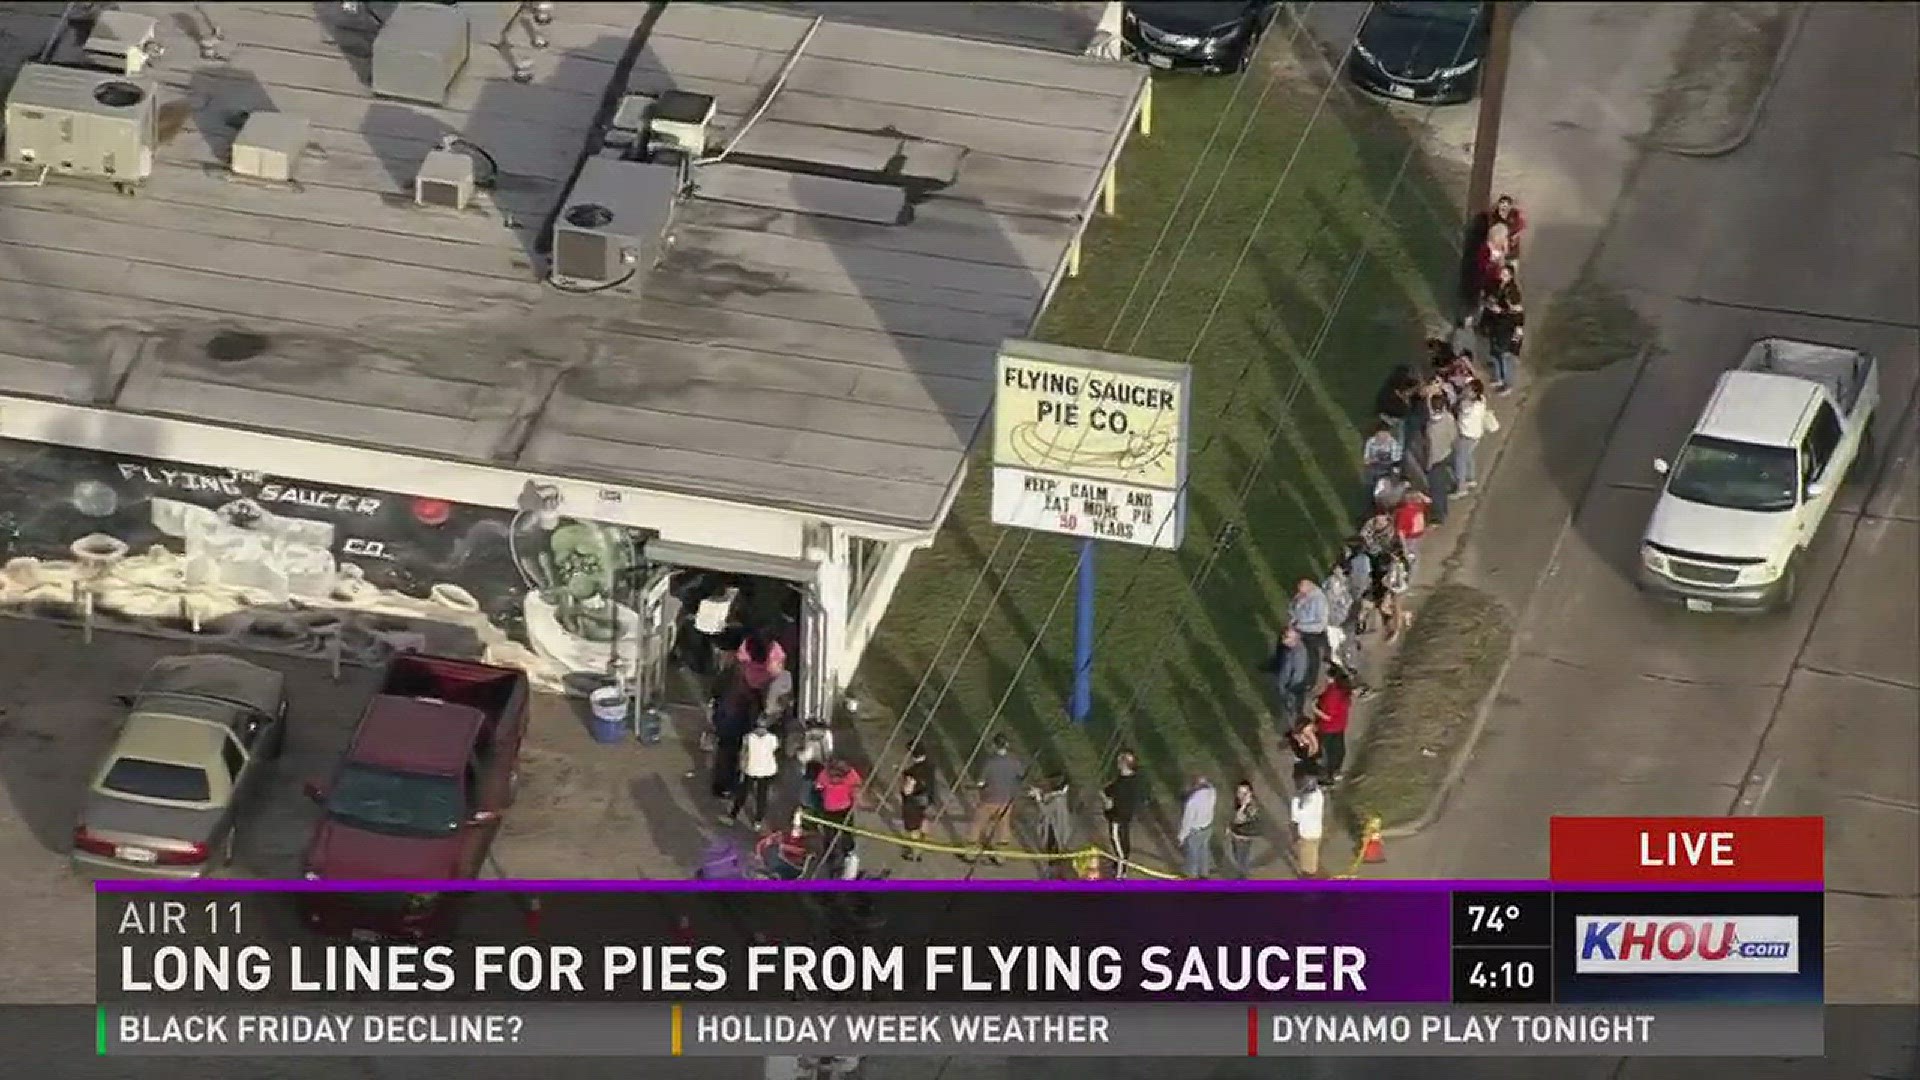 Be sure to give yourself some time to get that delicious pie. Lines have already wrapped outside at Houston favorite Flying Saucer Pie Company.